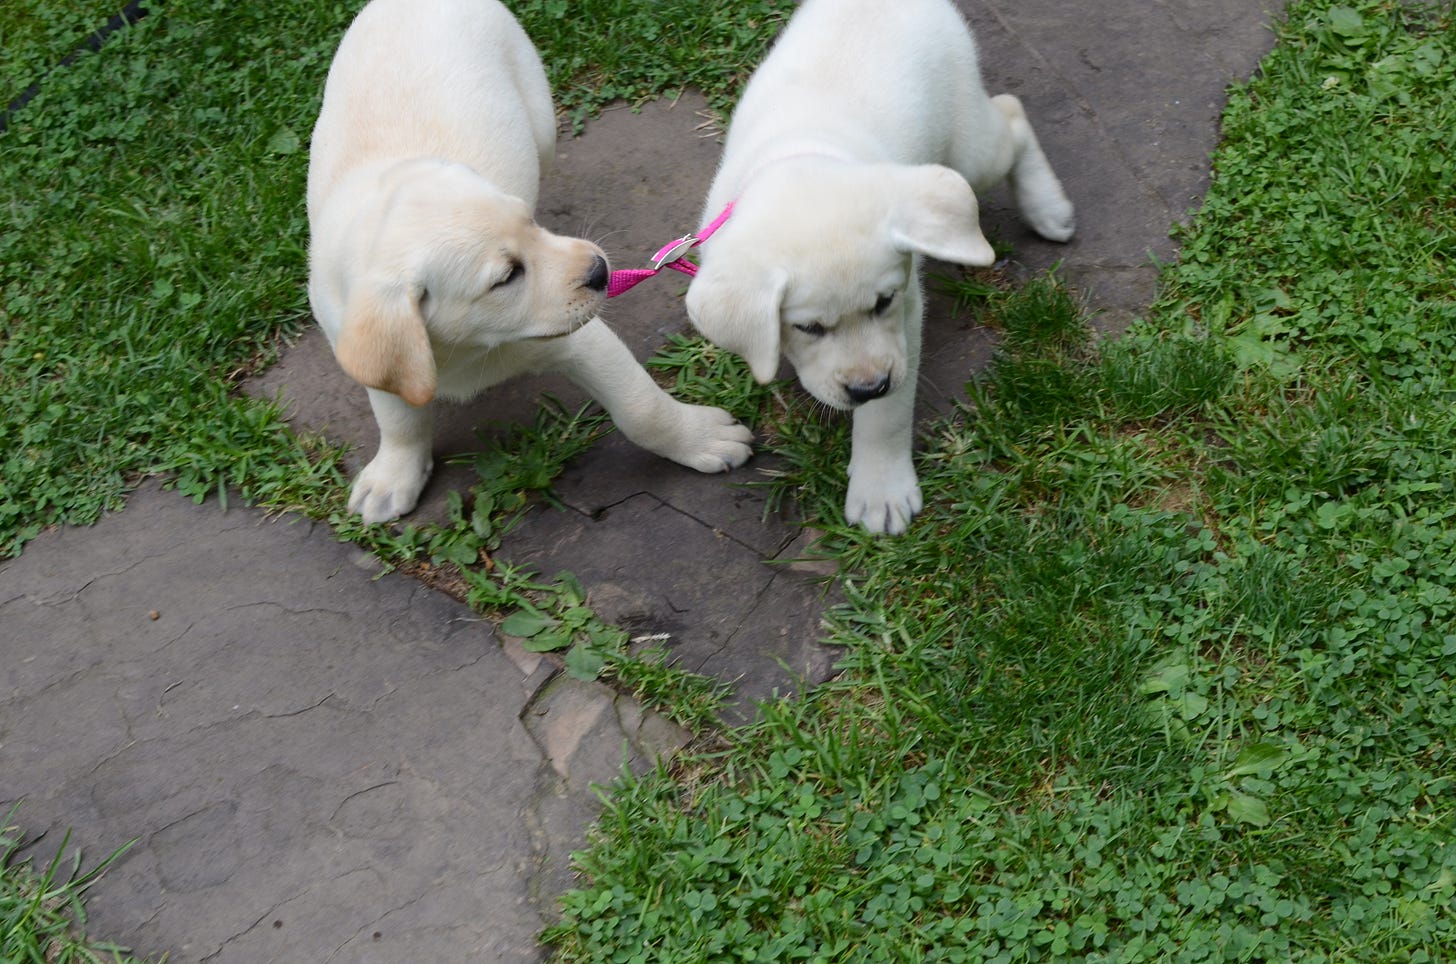 A yellow Labrador retriever puppy tugs on another yellow Lab puppy's pink collar. They're standing on a stone walkway in the grass.